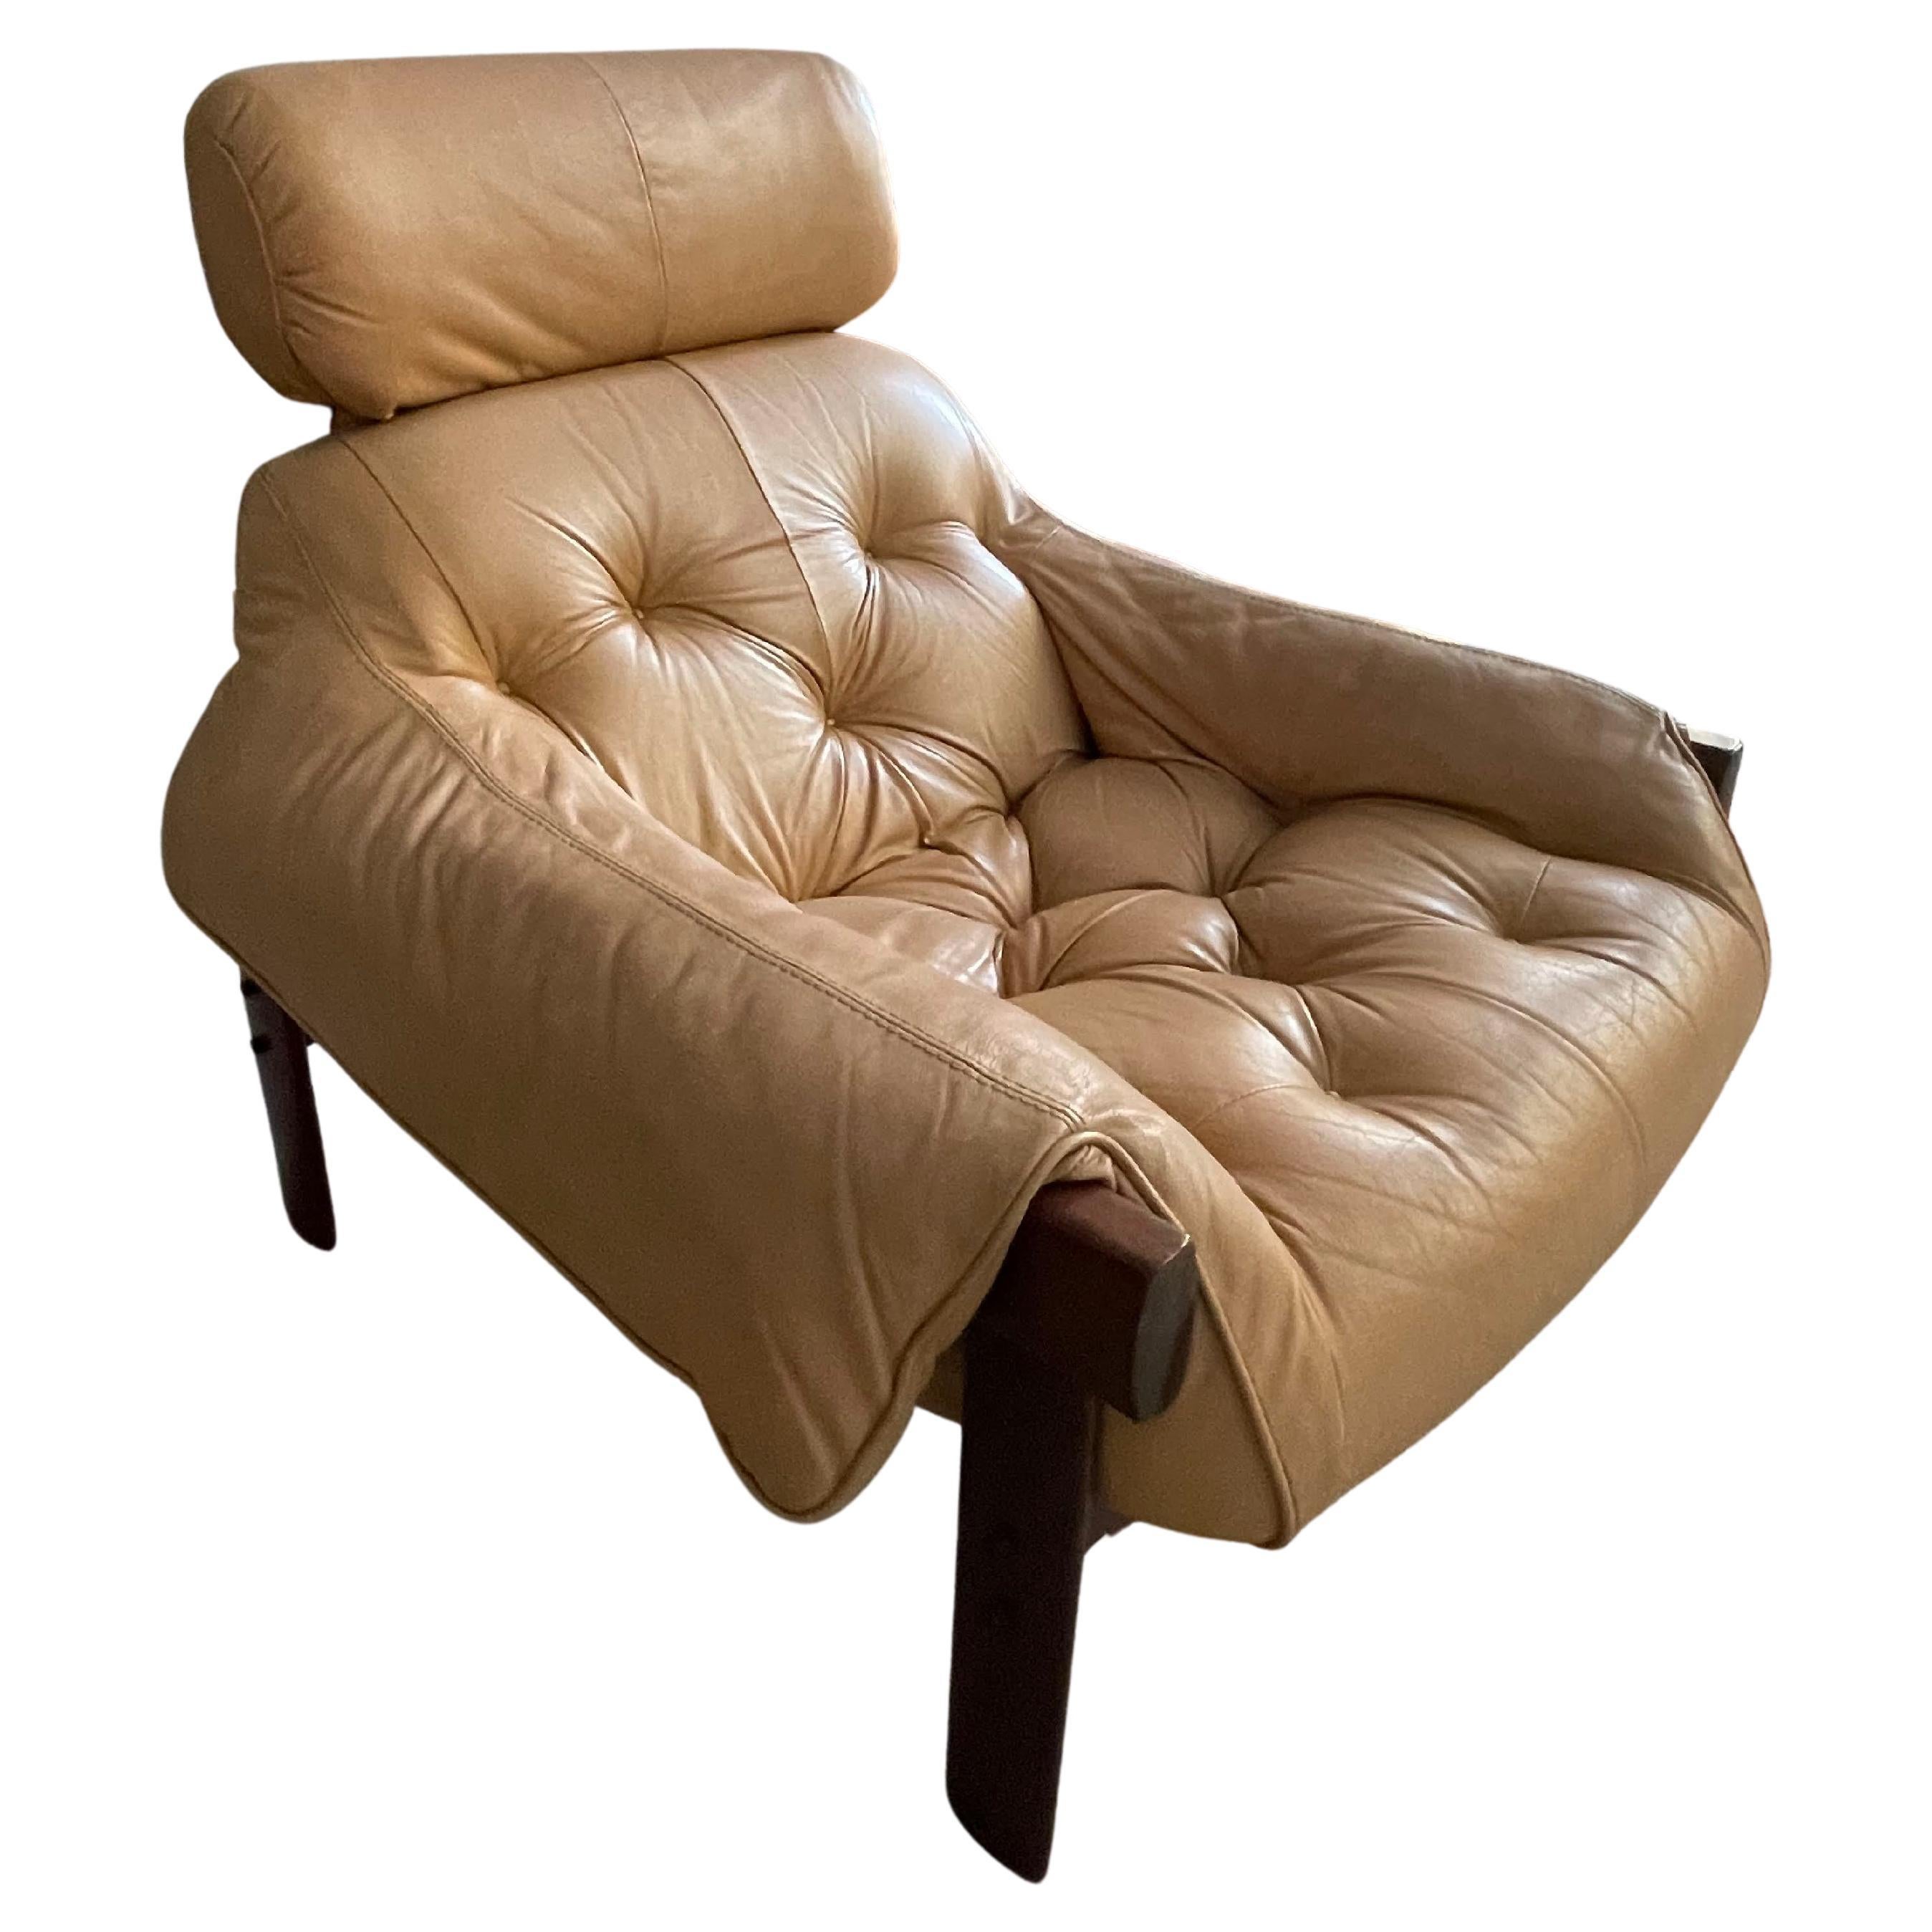 1'st Series Percival Lafer MP-41  Brazilian Leather Lounge Chair 